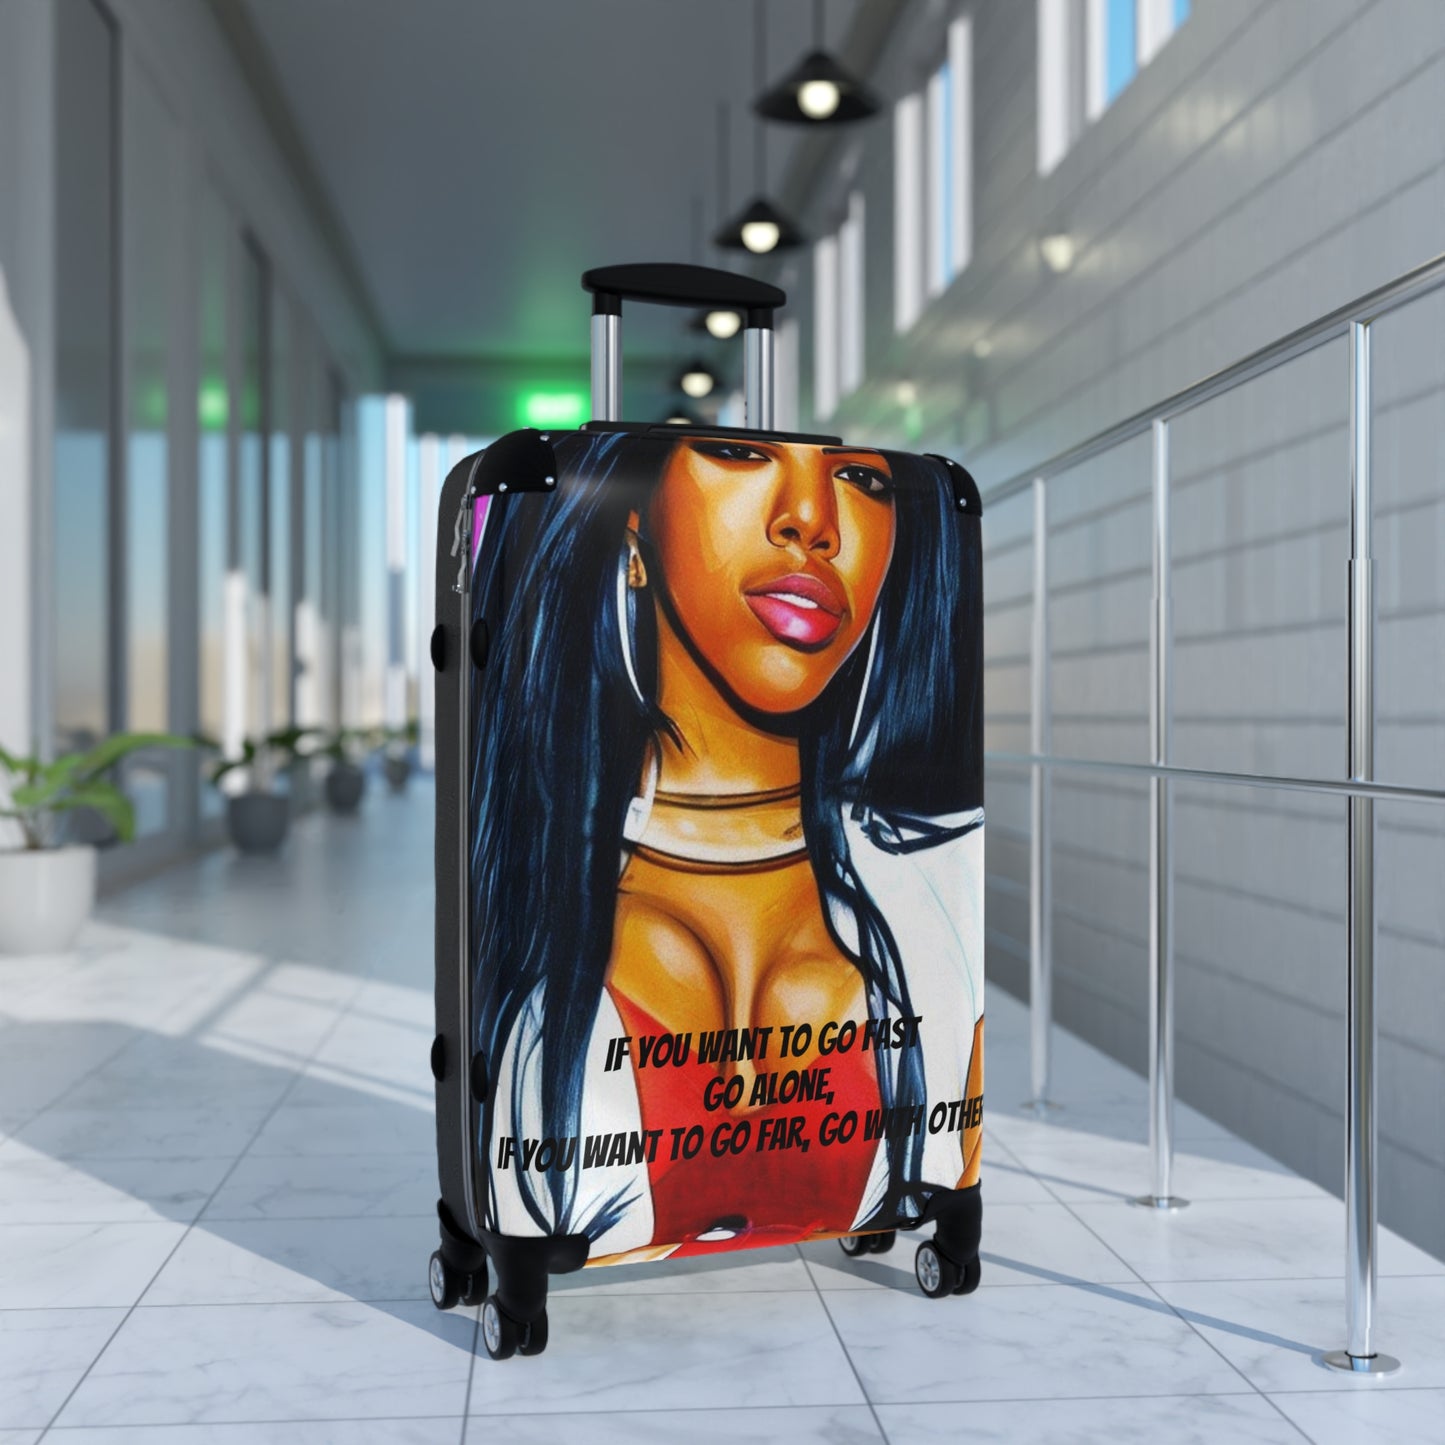 Aaliyah Tribute Suitcases